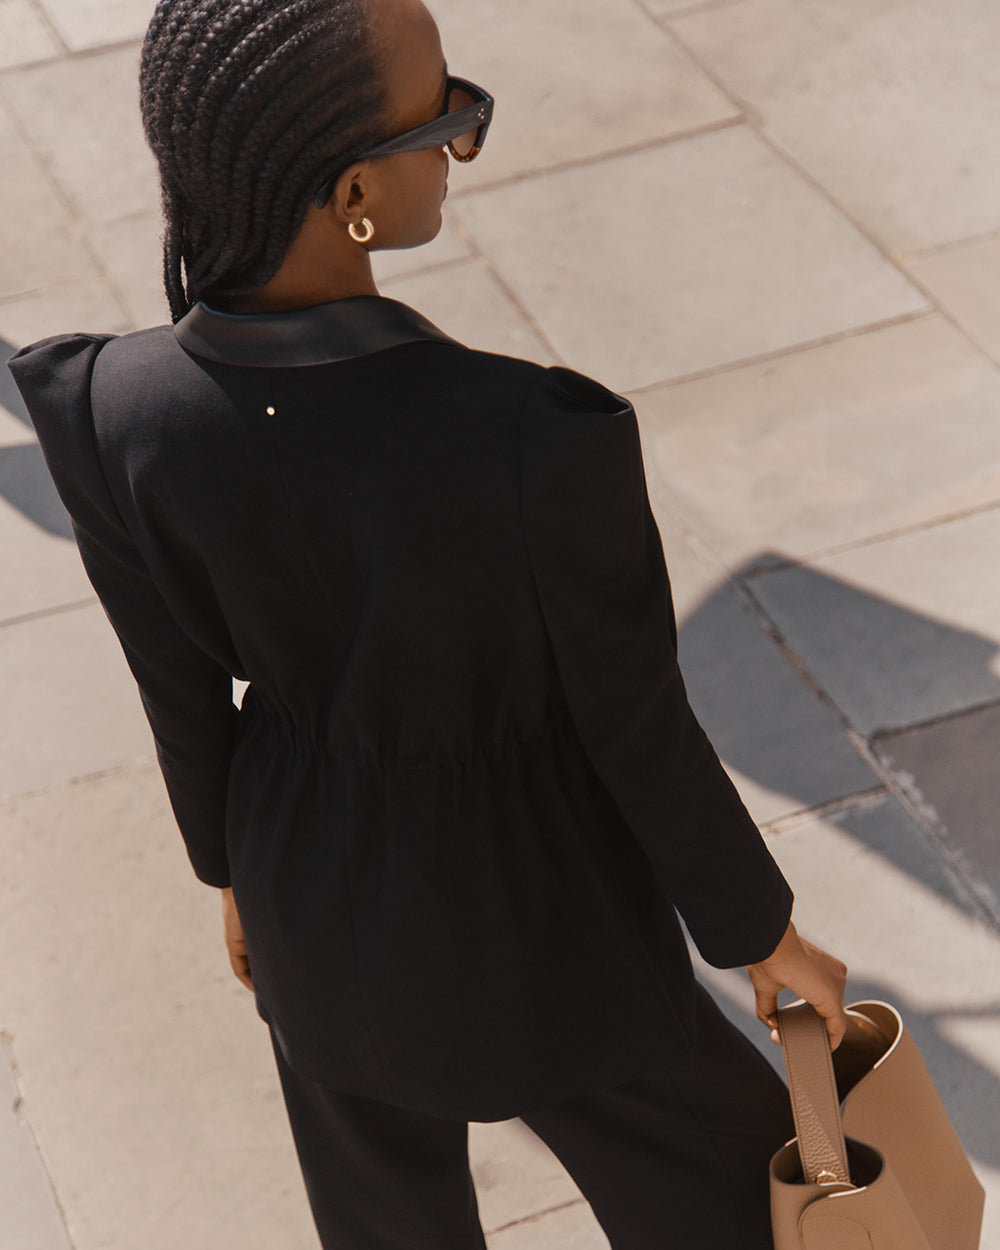 Woman in sunglasses holding a bag, walking on a street.